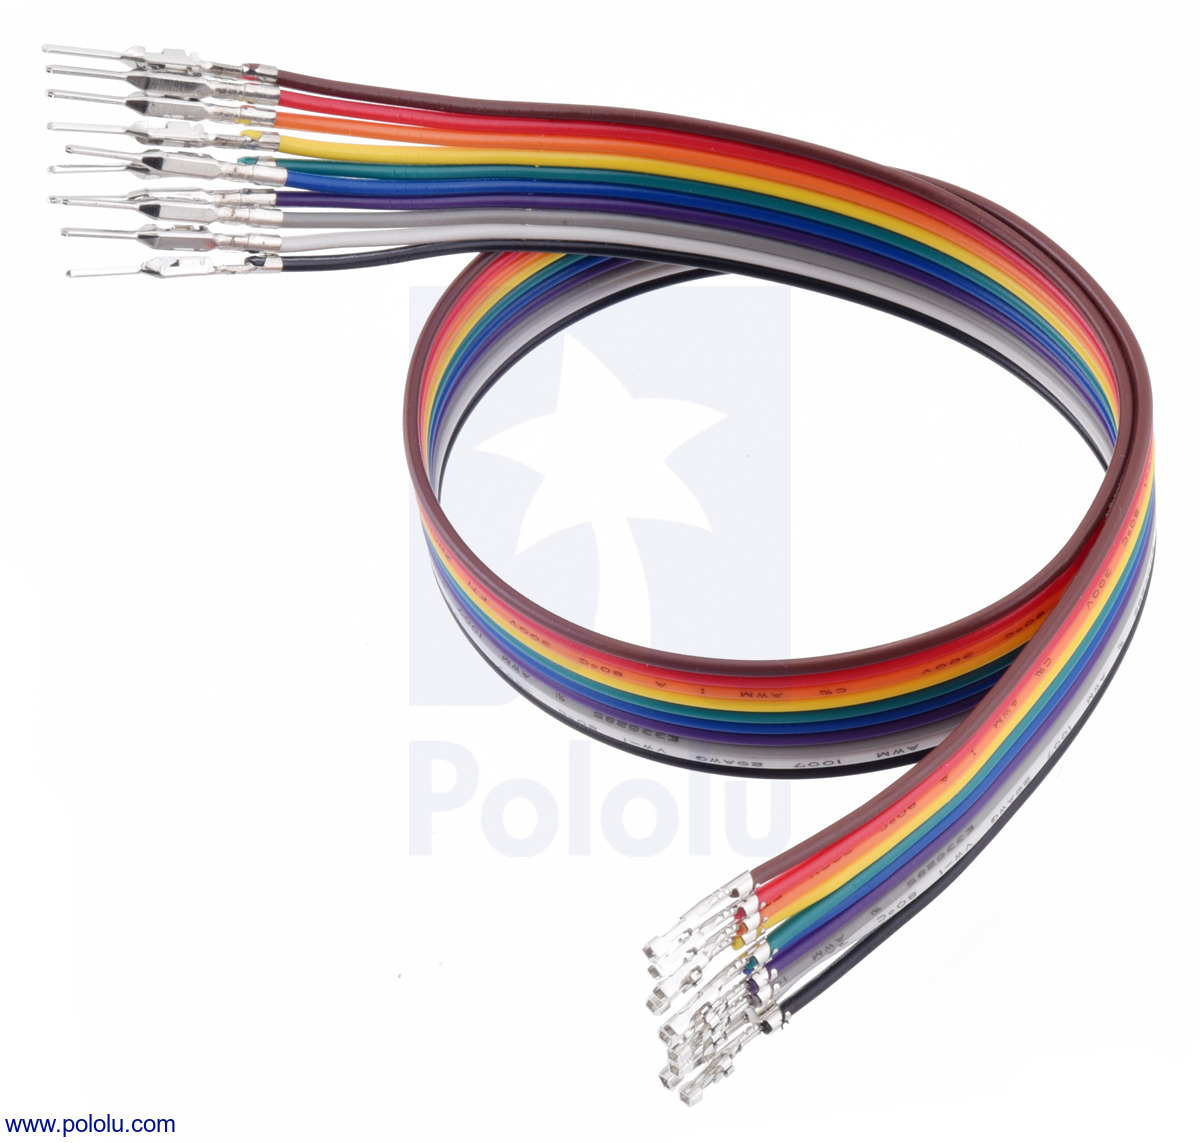 5 wire ribbon cable, dupont connectors (male/male).